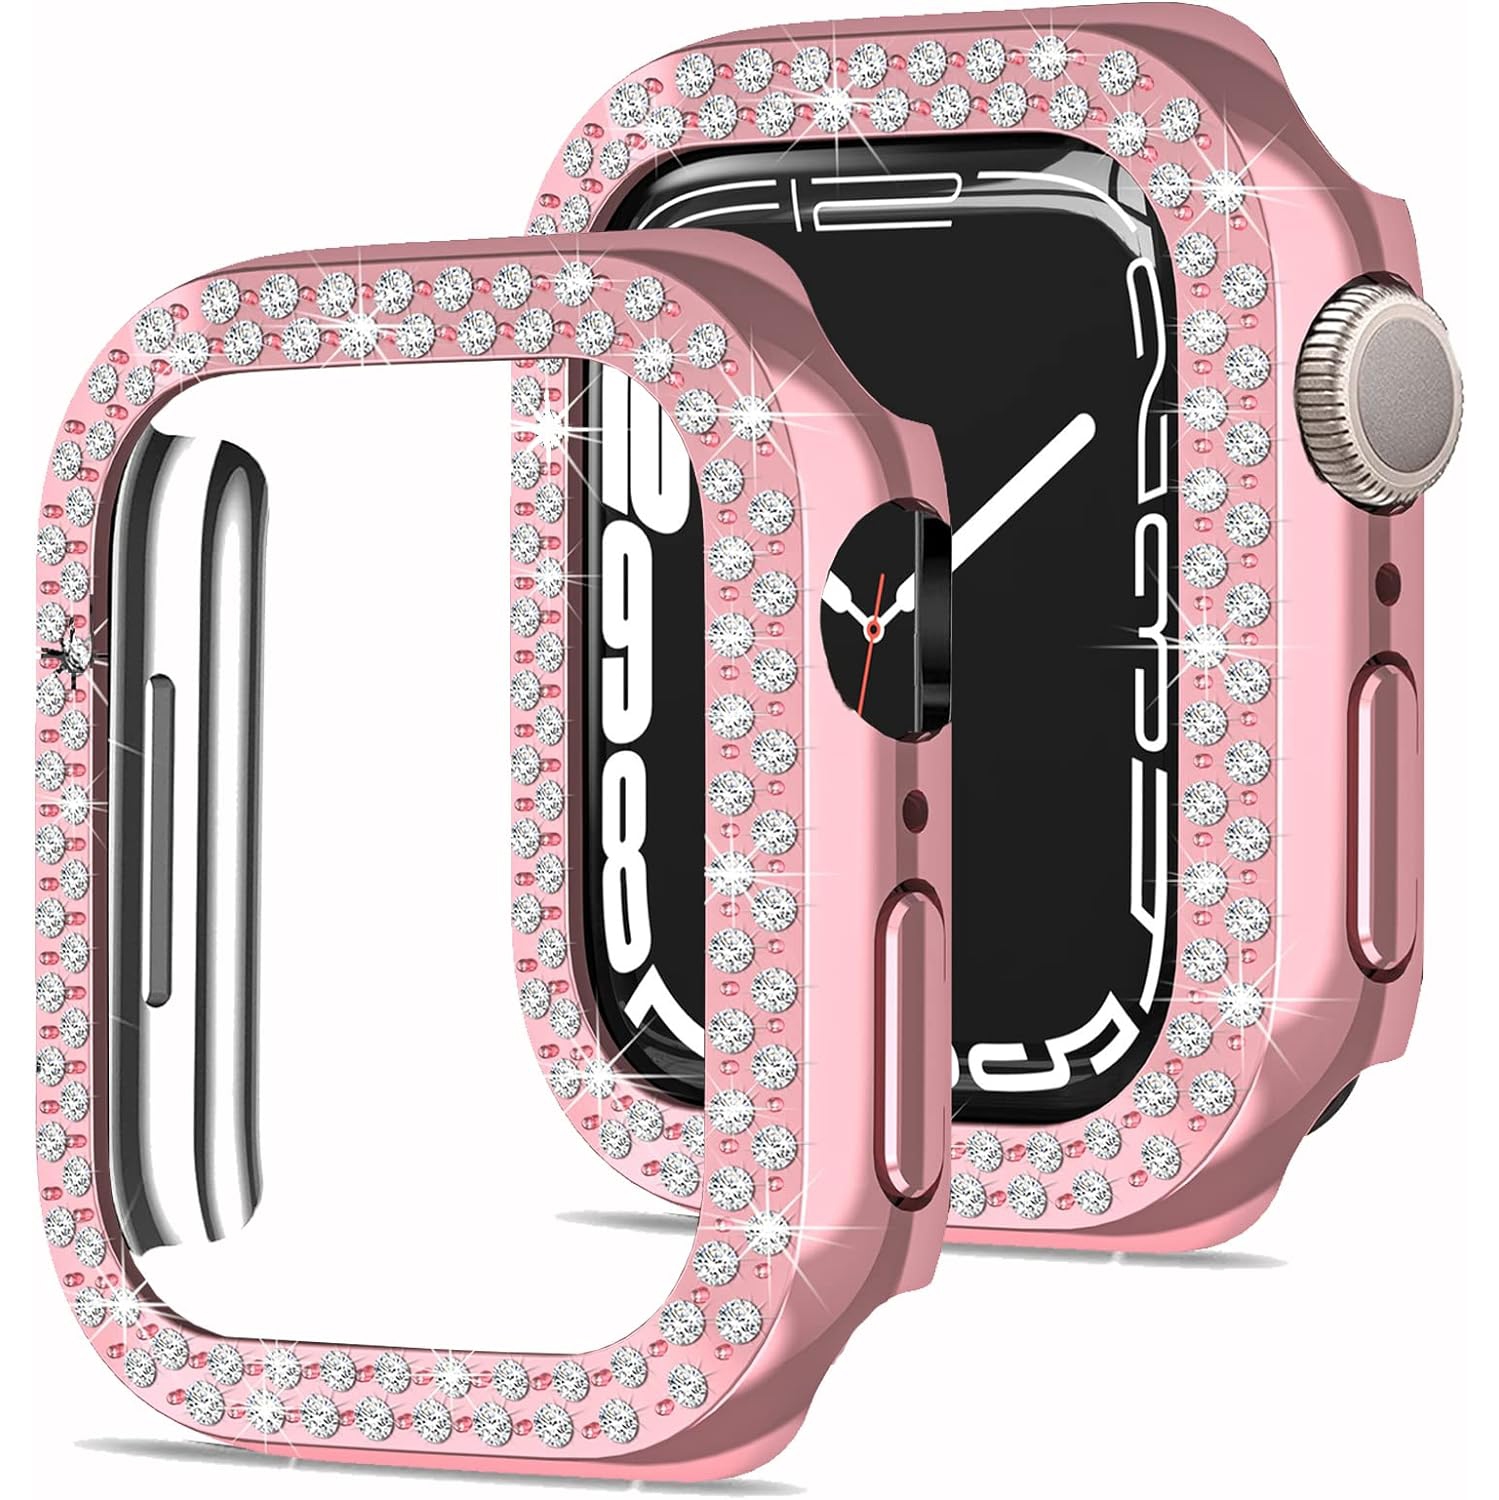 Compatible with Apple Watch Case Series 3 2 1 42mm,Hard PC Bling Crystal Diamonds Anti-Scratch Protector Bumper